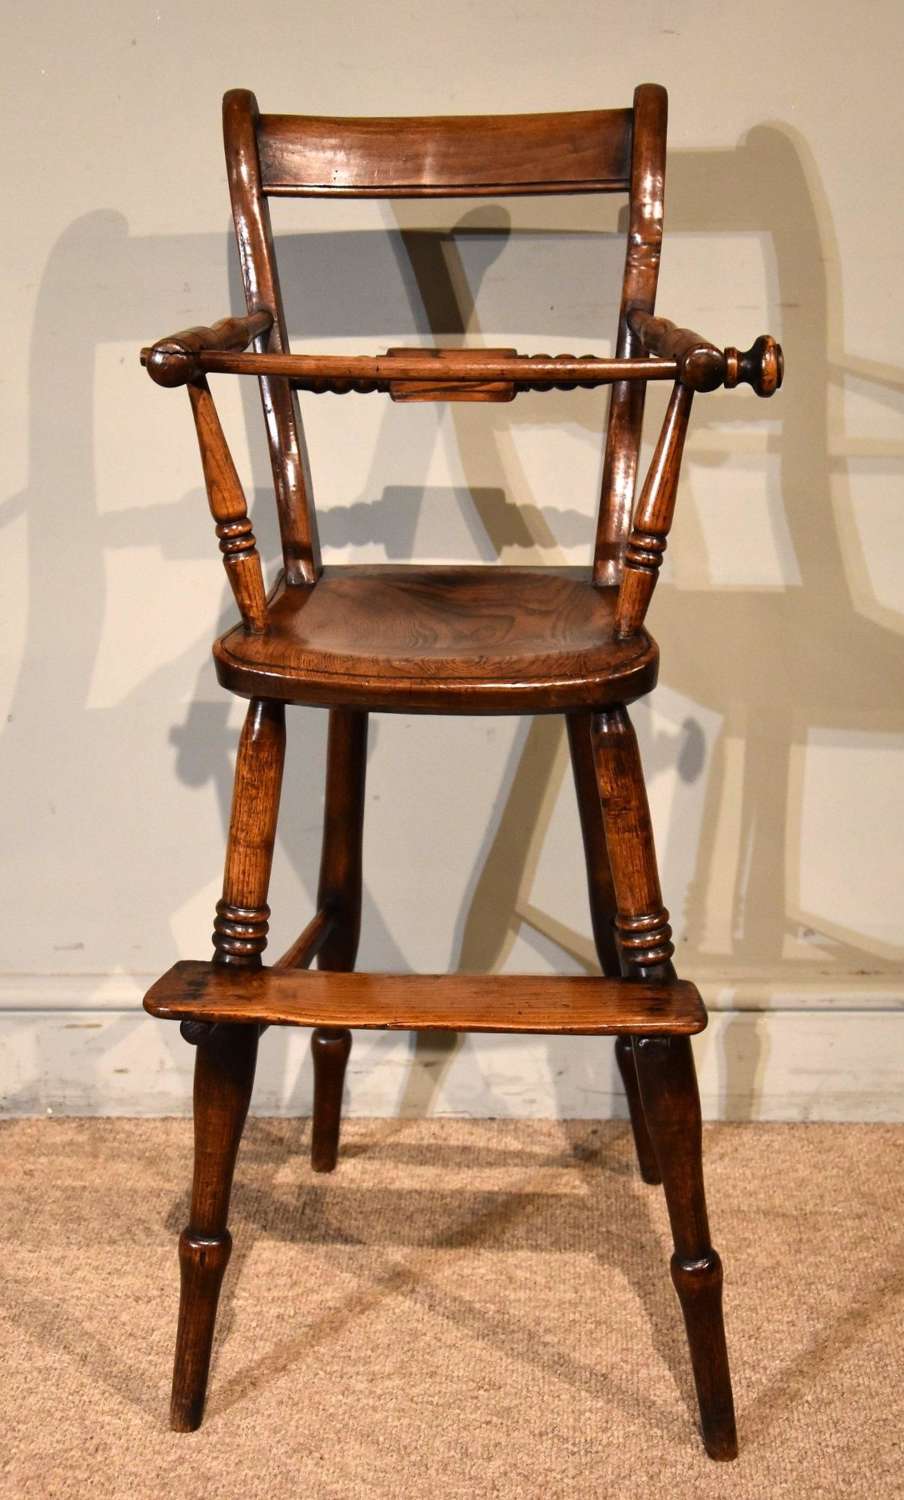 19th Century Elm and Ash Childs High Chair